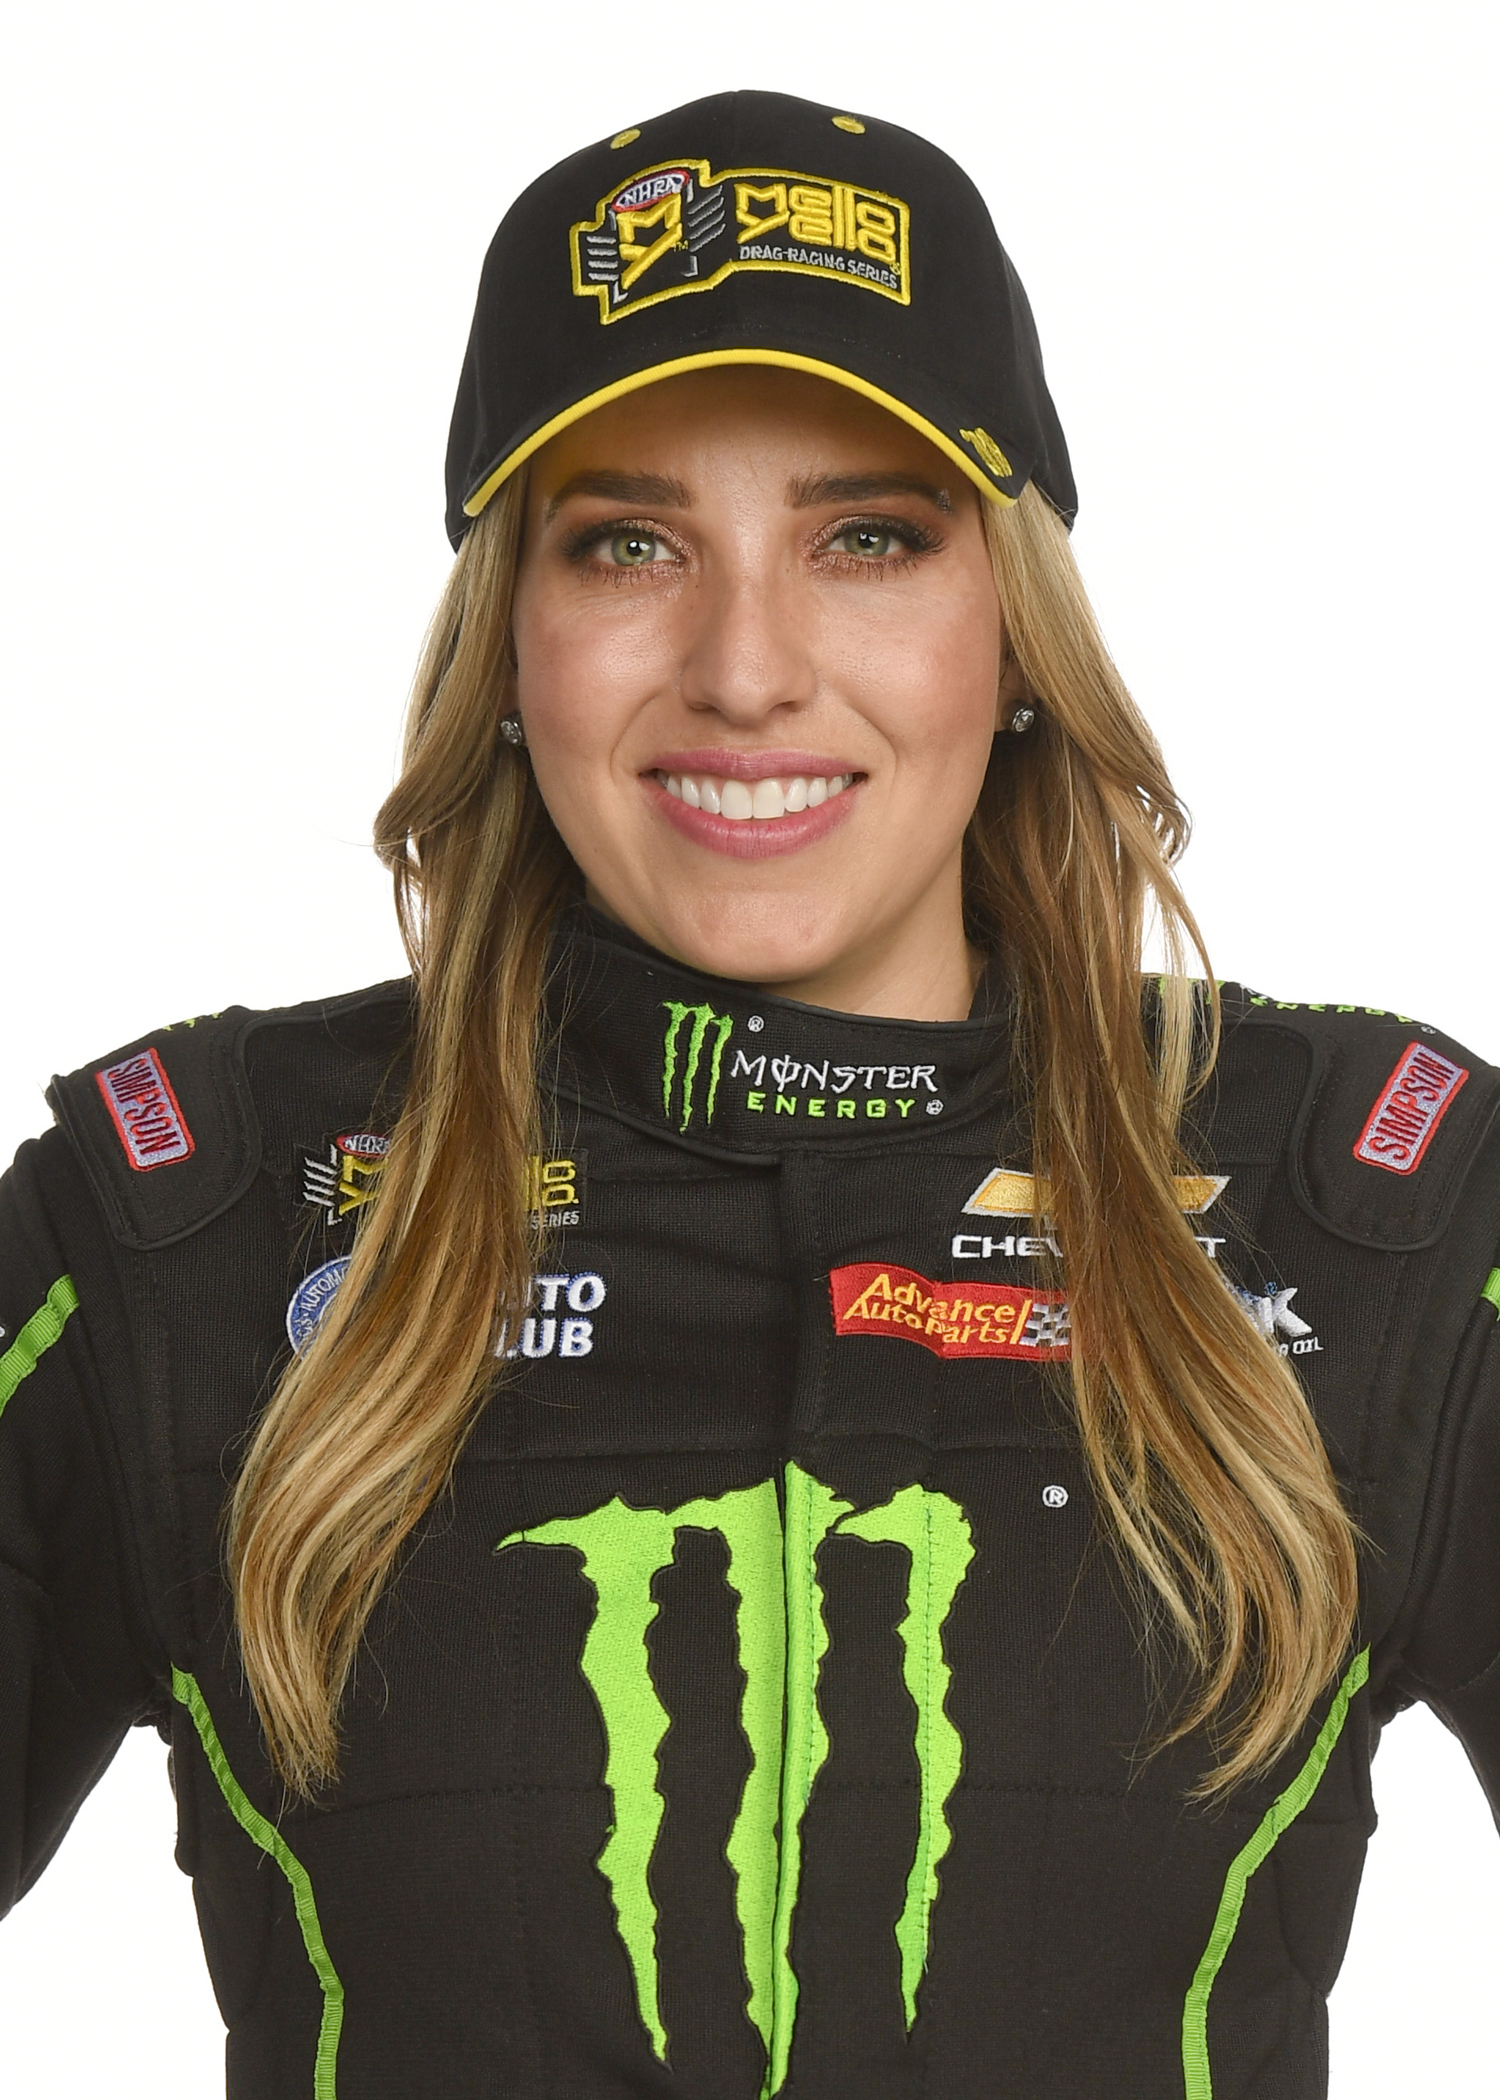 NHRA Top Fuel Brittany Force